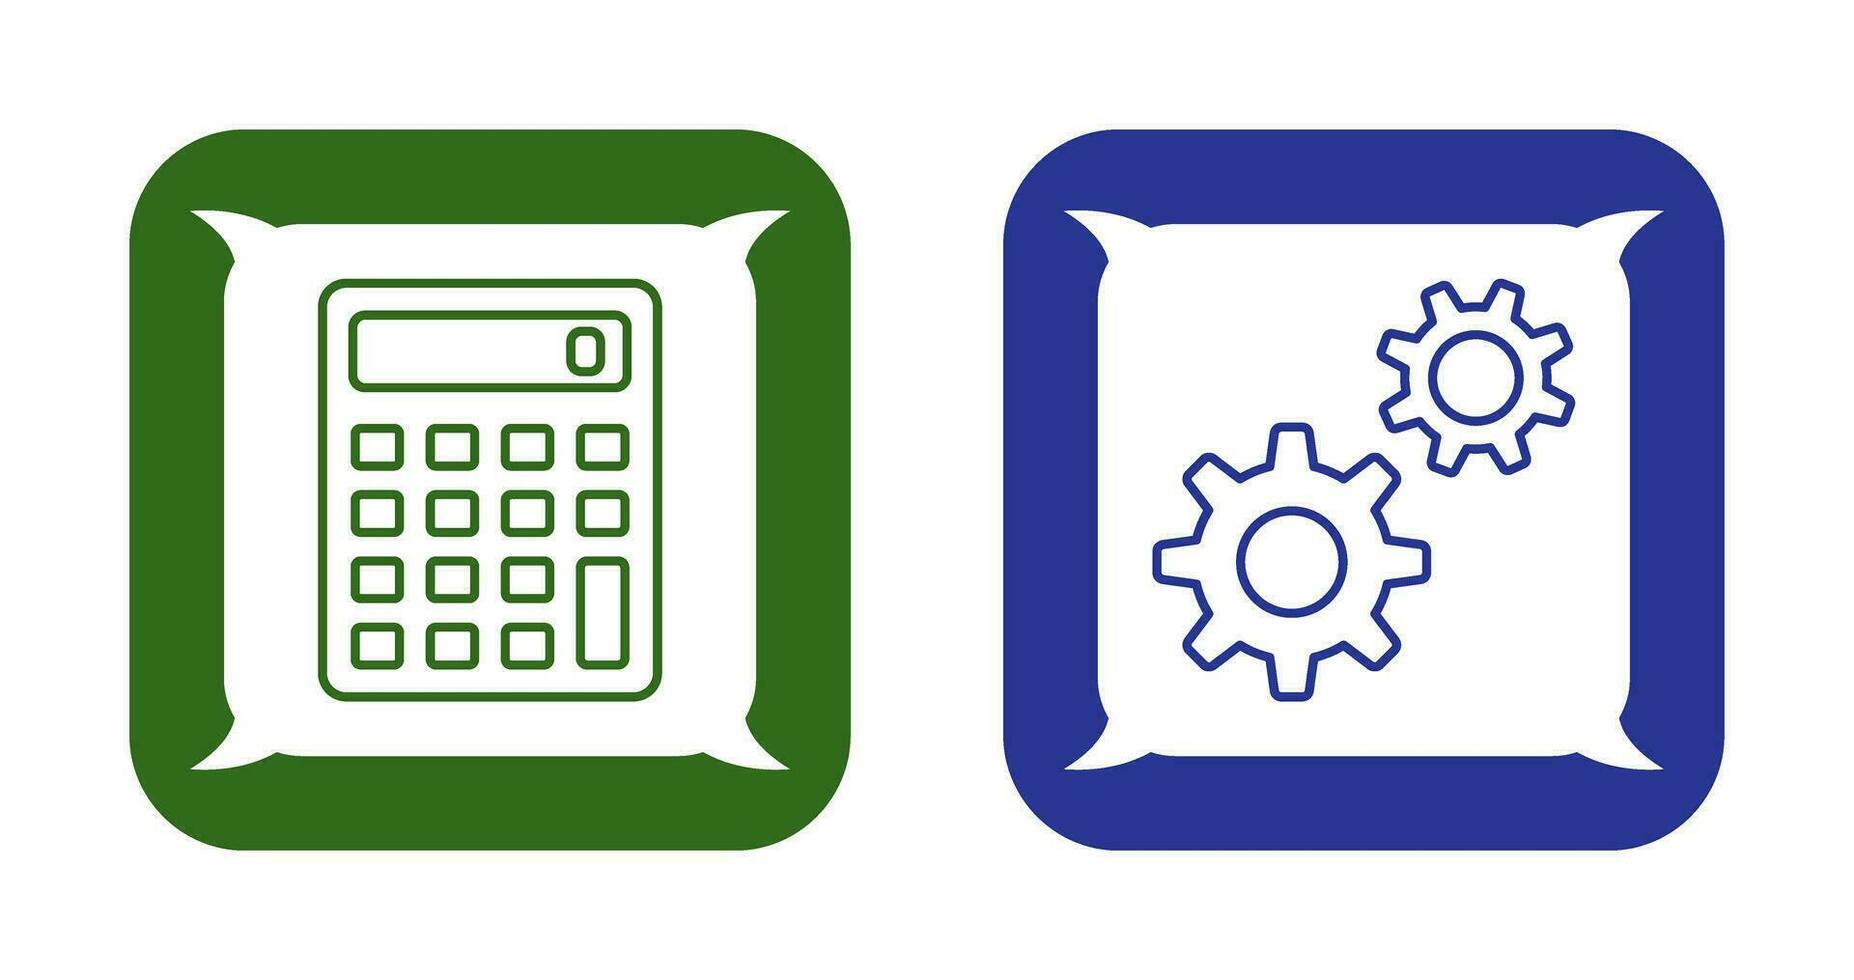 Calculator and Setting Icon vector